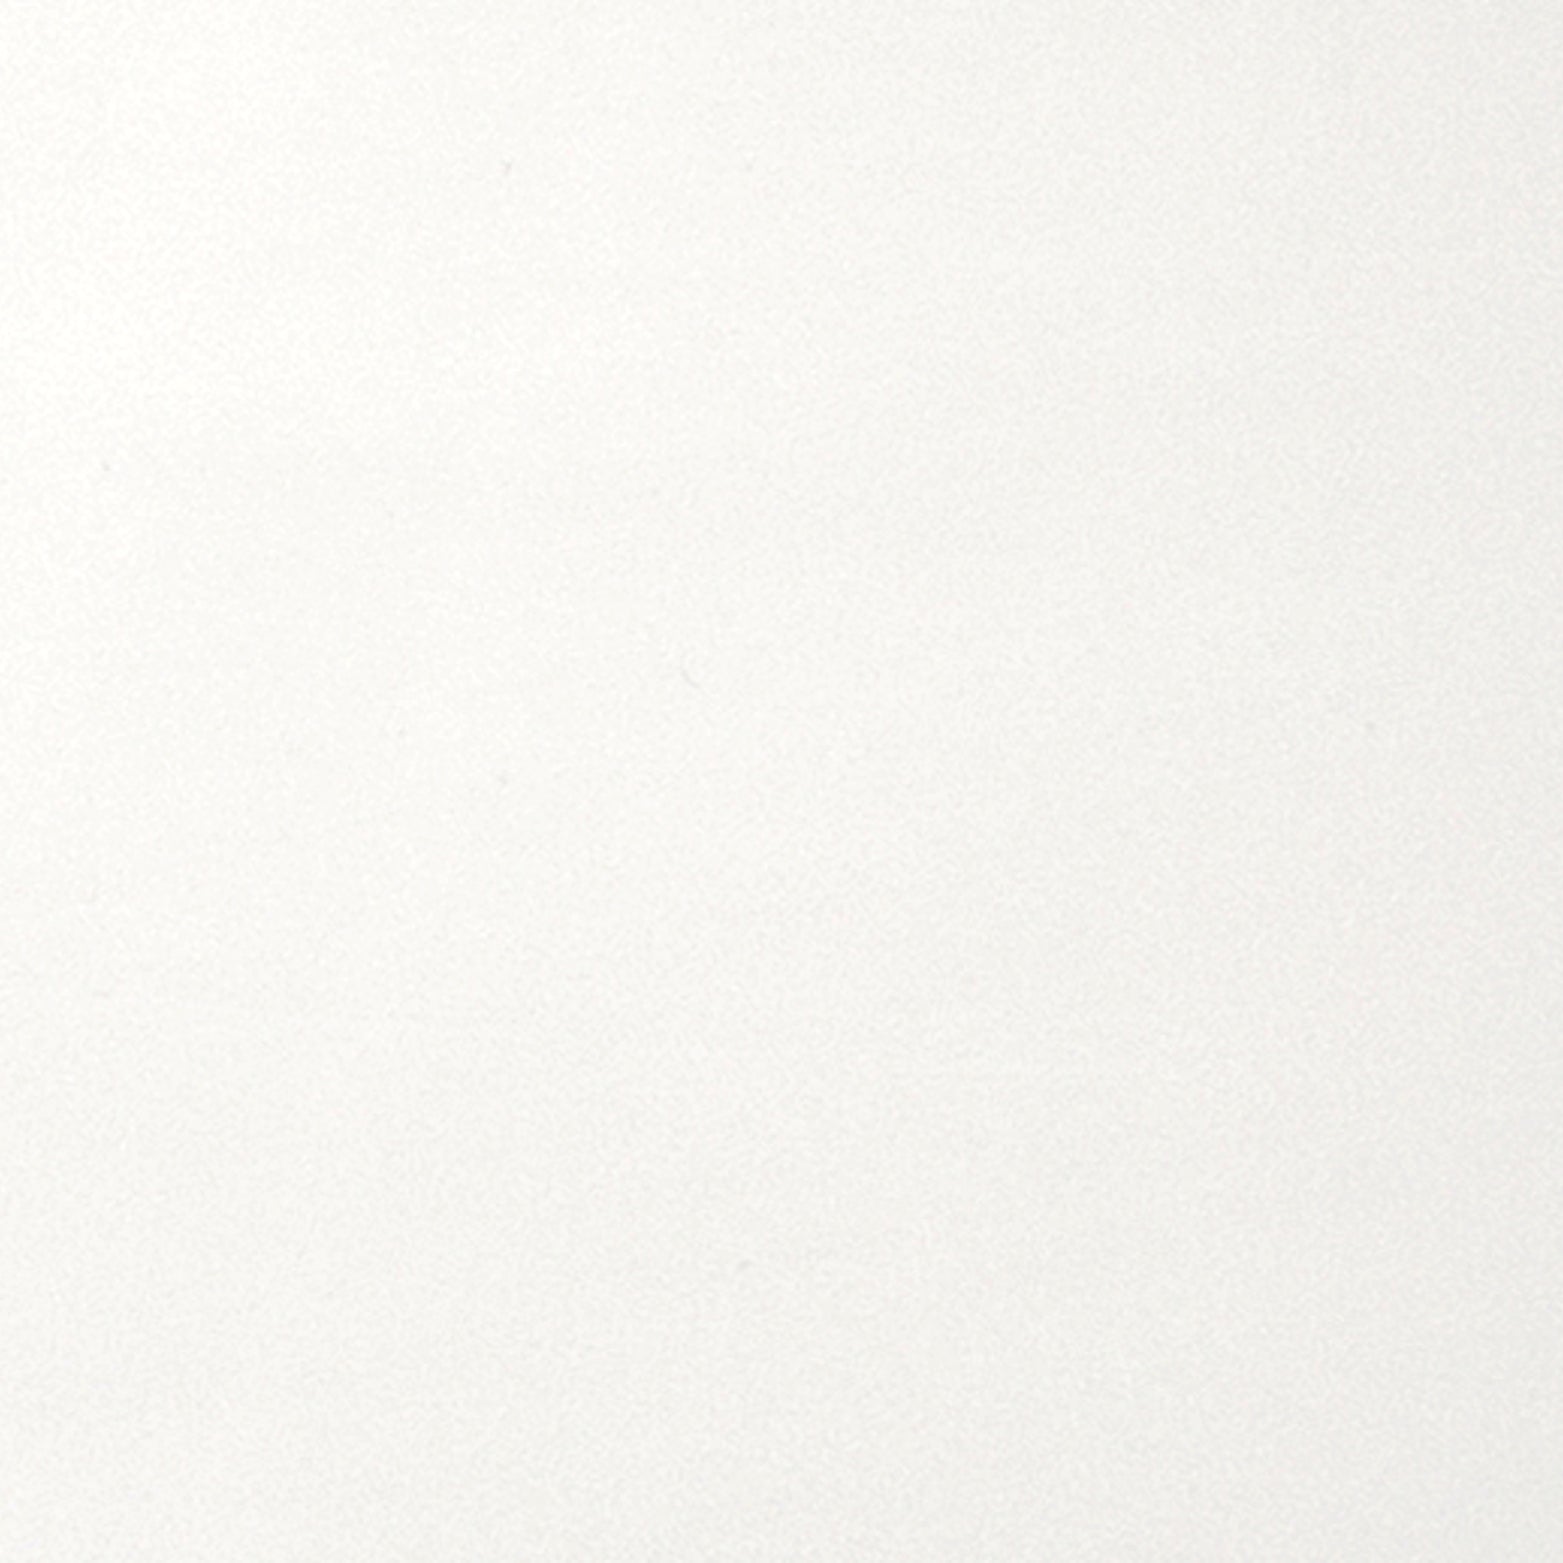 TIMBERLINE ARCTIC WHITE SILKSURFACE TOP PAPER SAMPLE